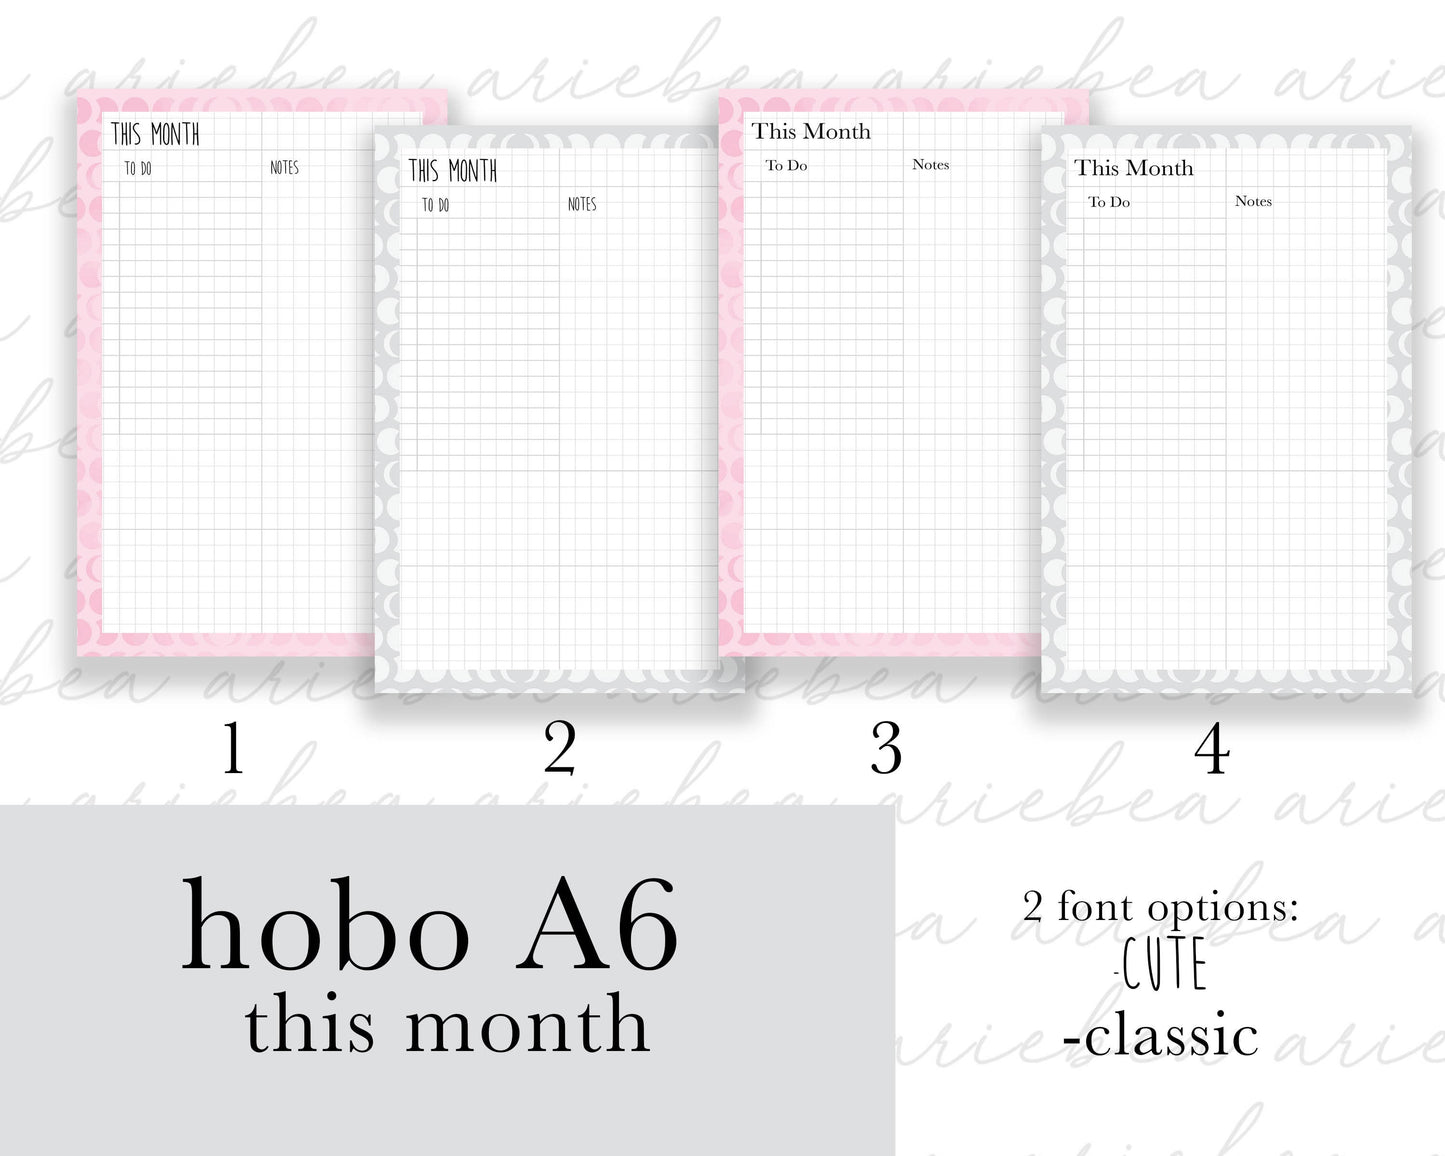 This Month Hobonichi A6 Original Full Page Planner Stickers